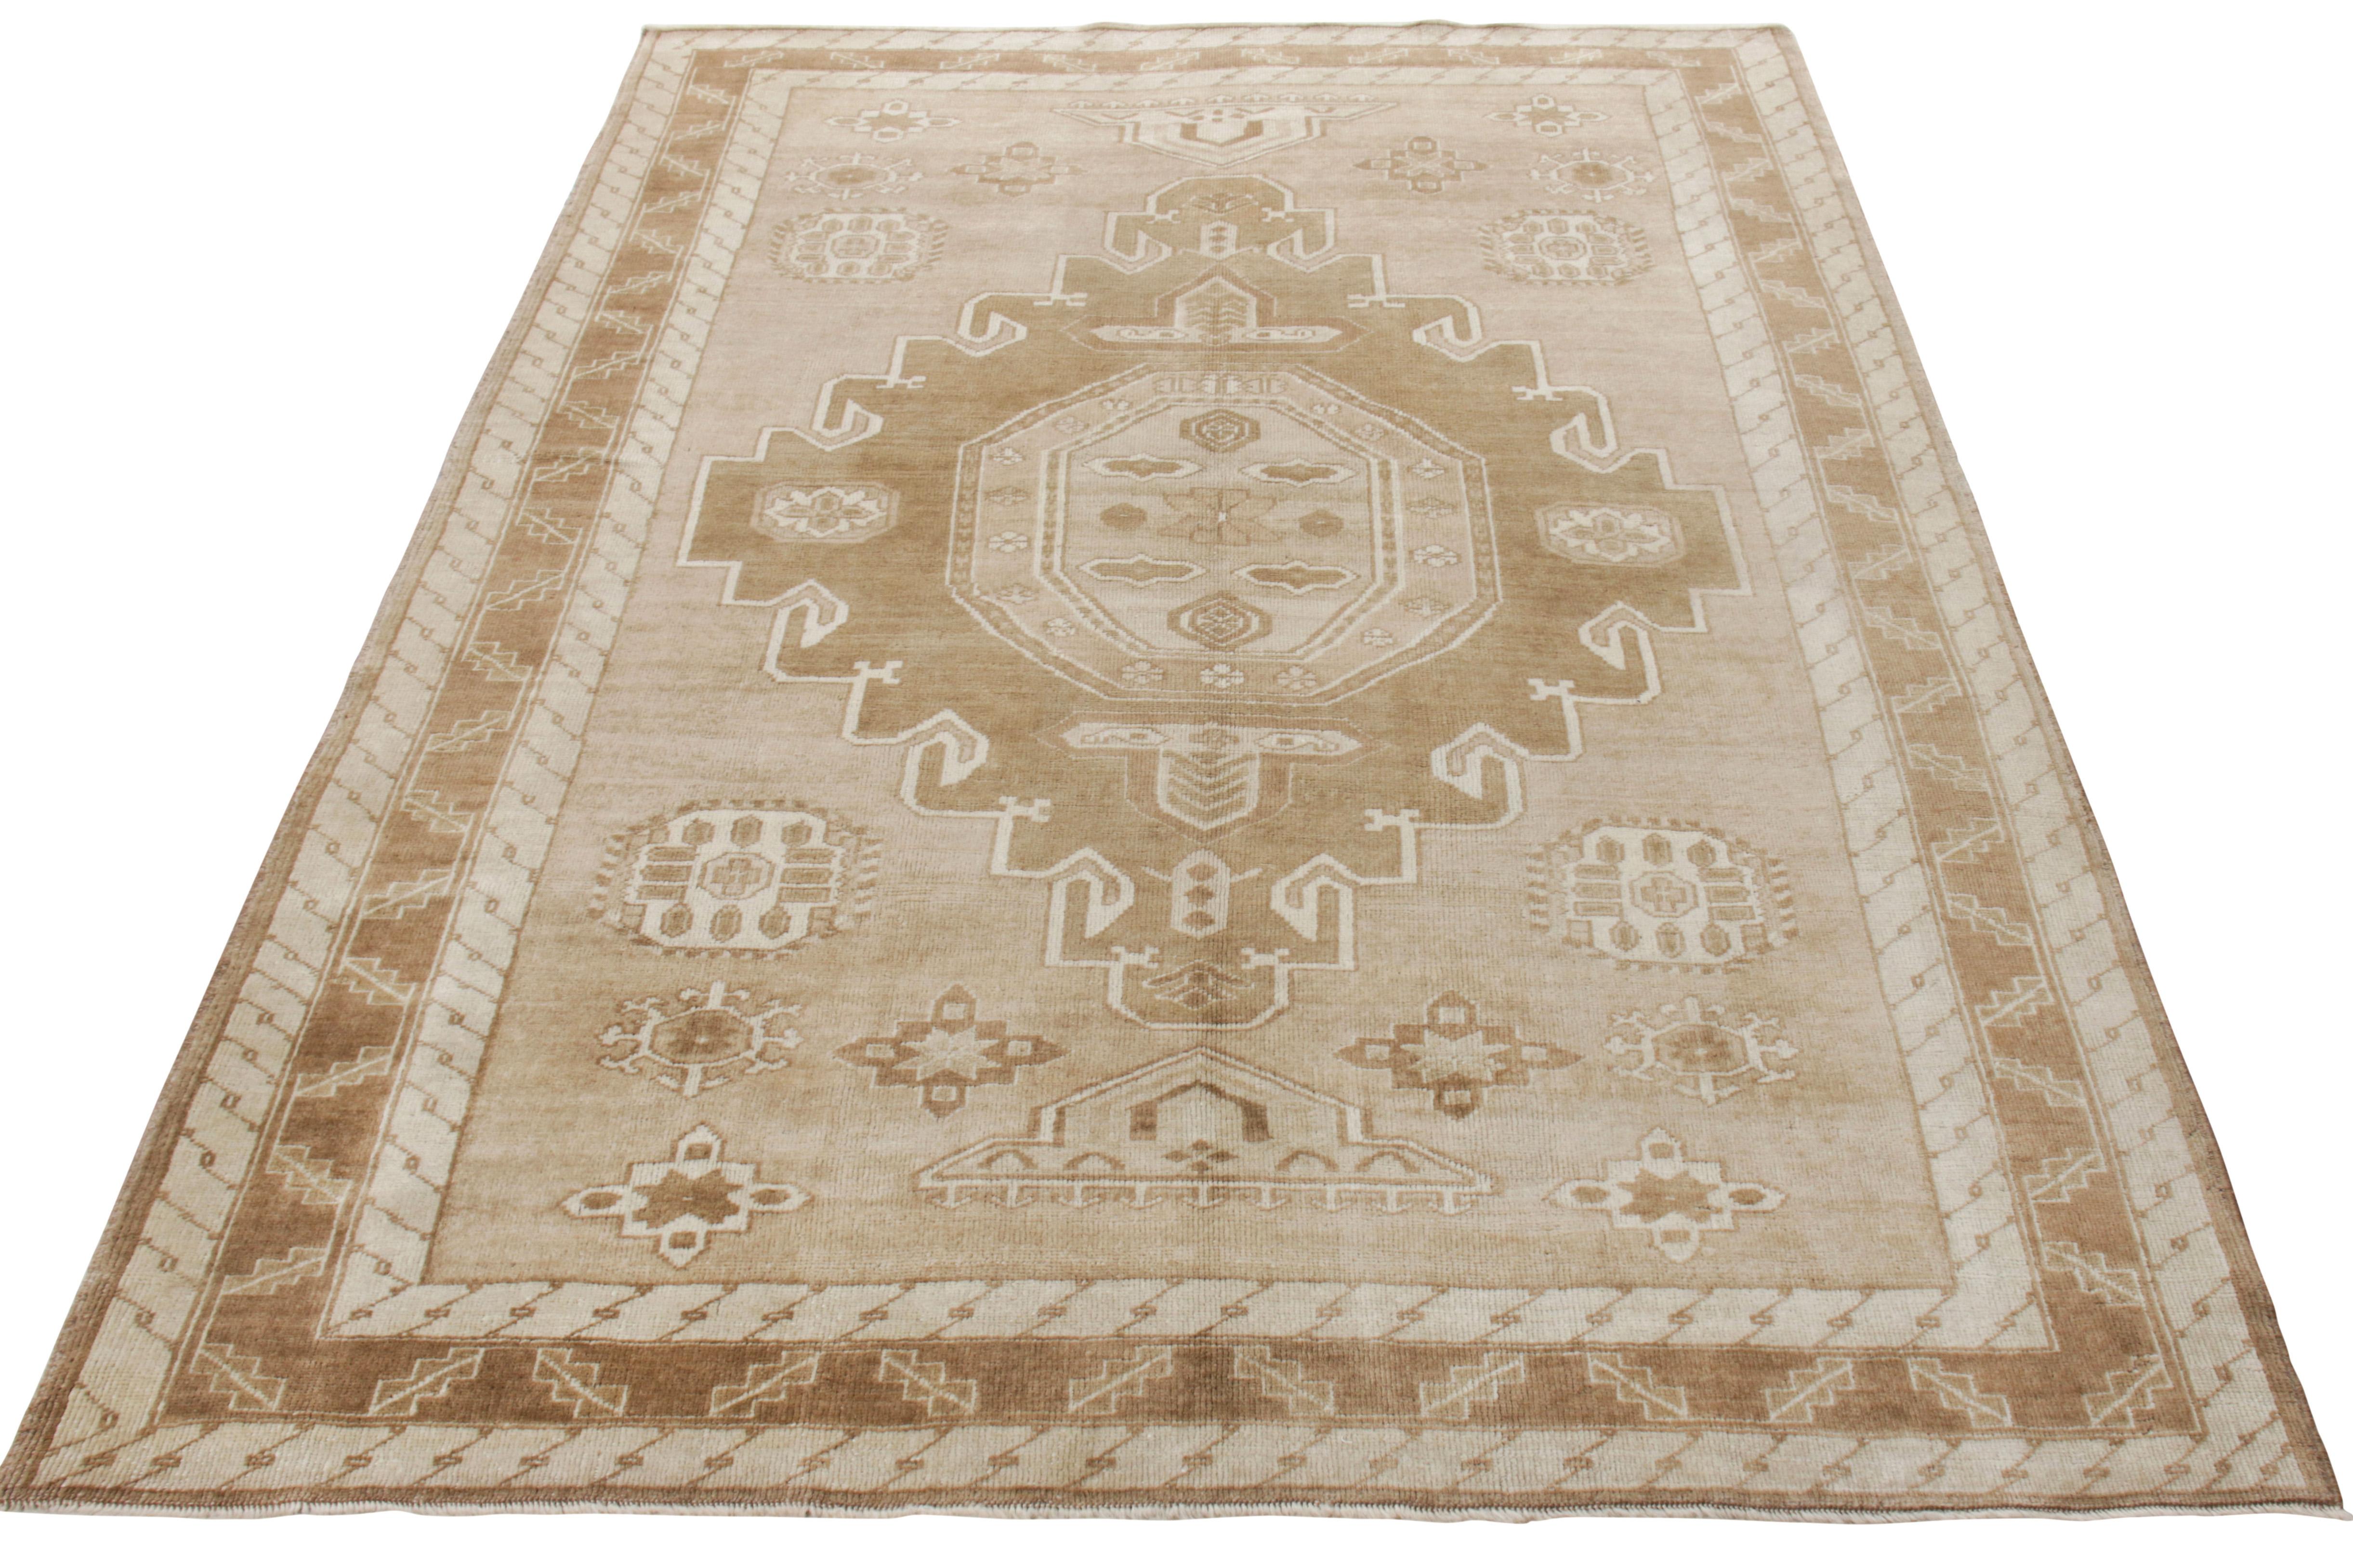 Hand knotted in wool, a vintage Kars rug originating from Turkey circa 1950-1960. This piece defines mid century craftsmanship in its pristine form that enjoys the union of a clean medallion & geometric pattern with muted shades of beige-brown &